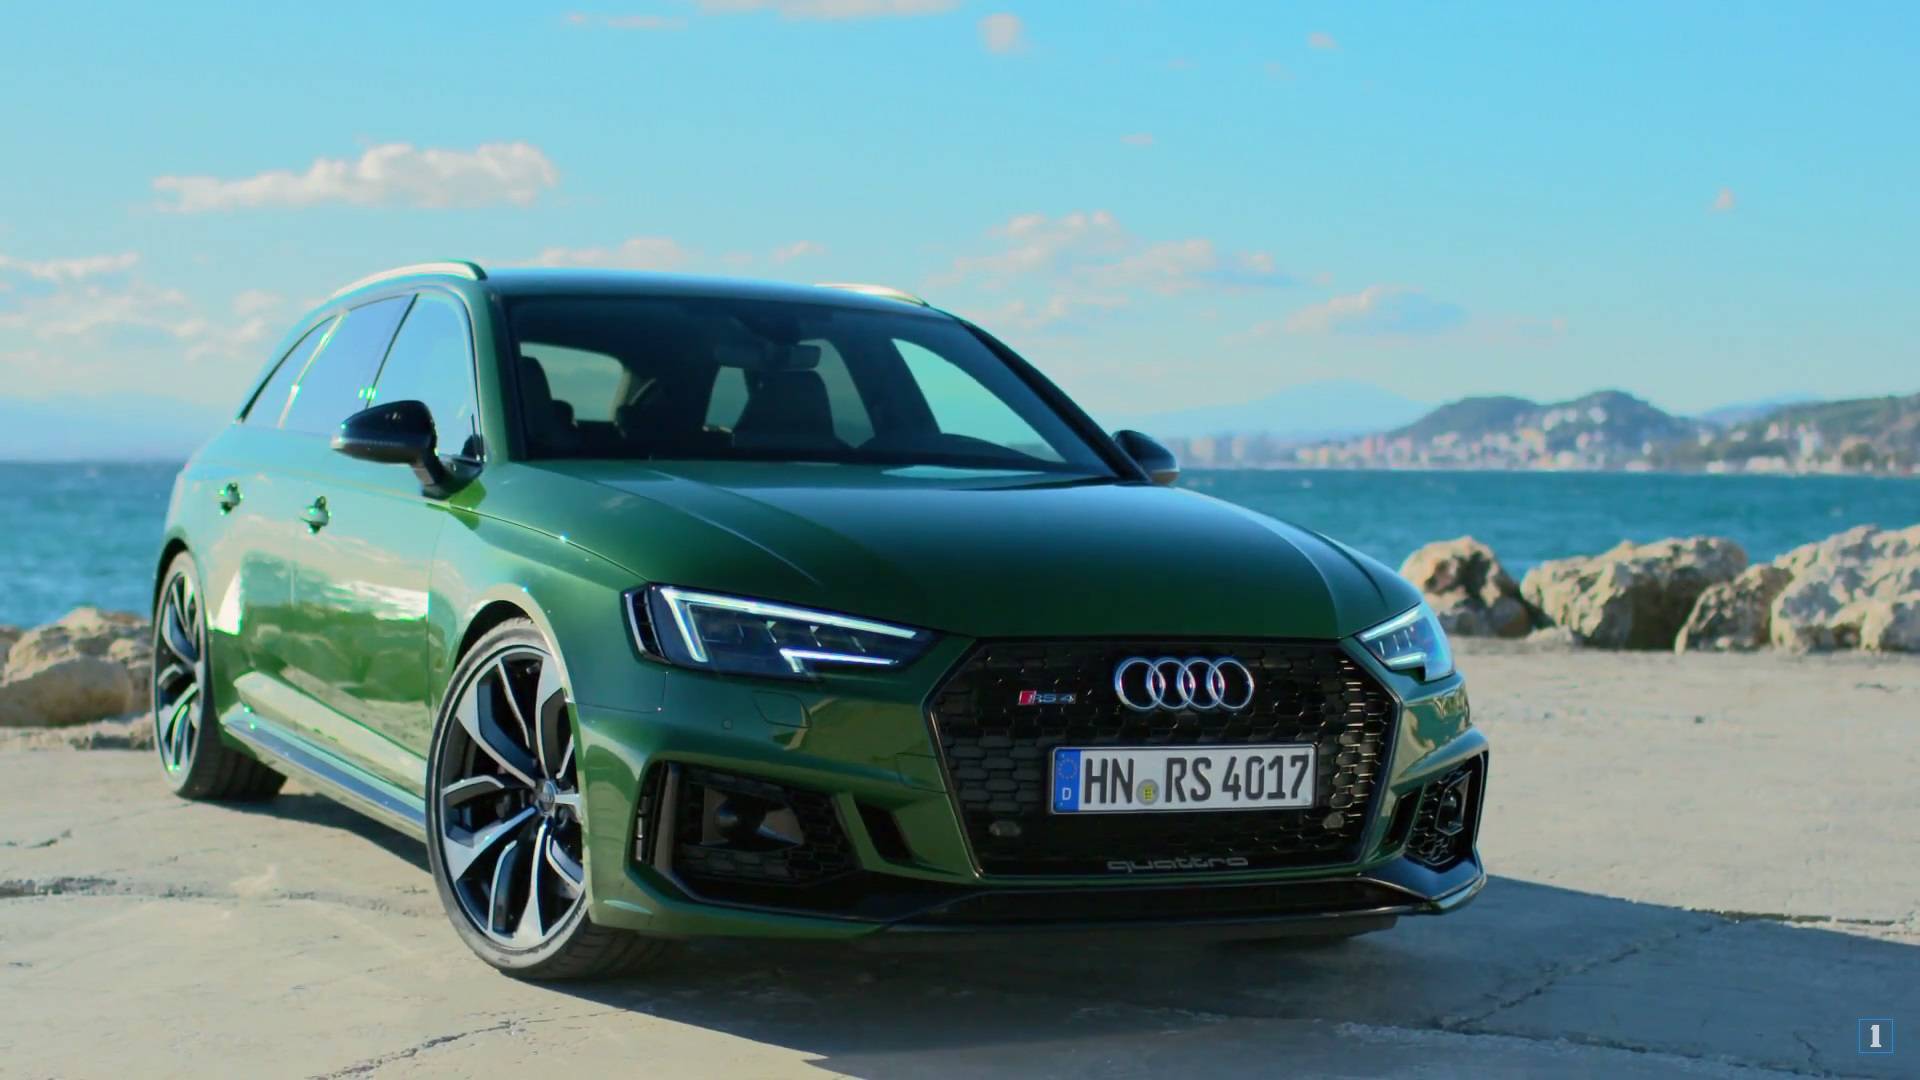 Audi Rs4 Avant Sonoma Green Is Hulk Approved In Promo Video